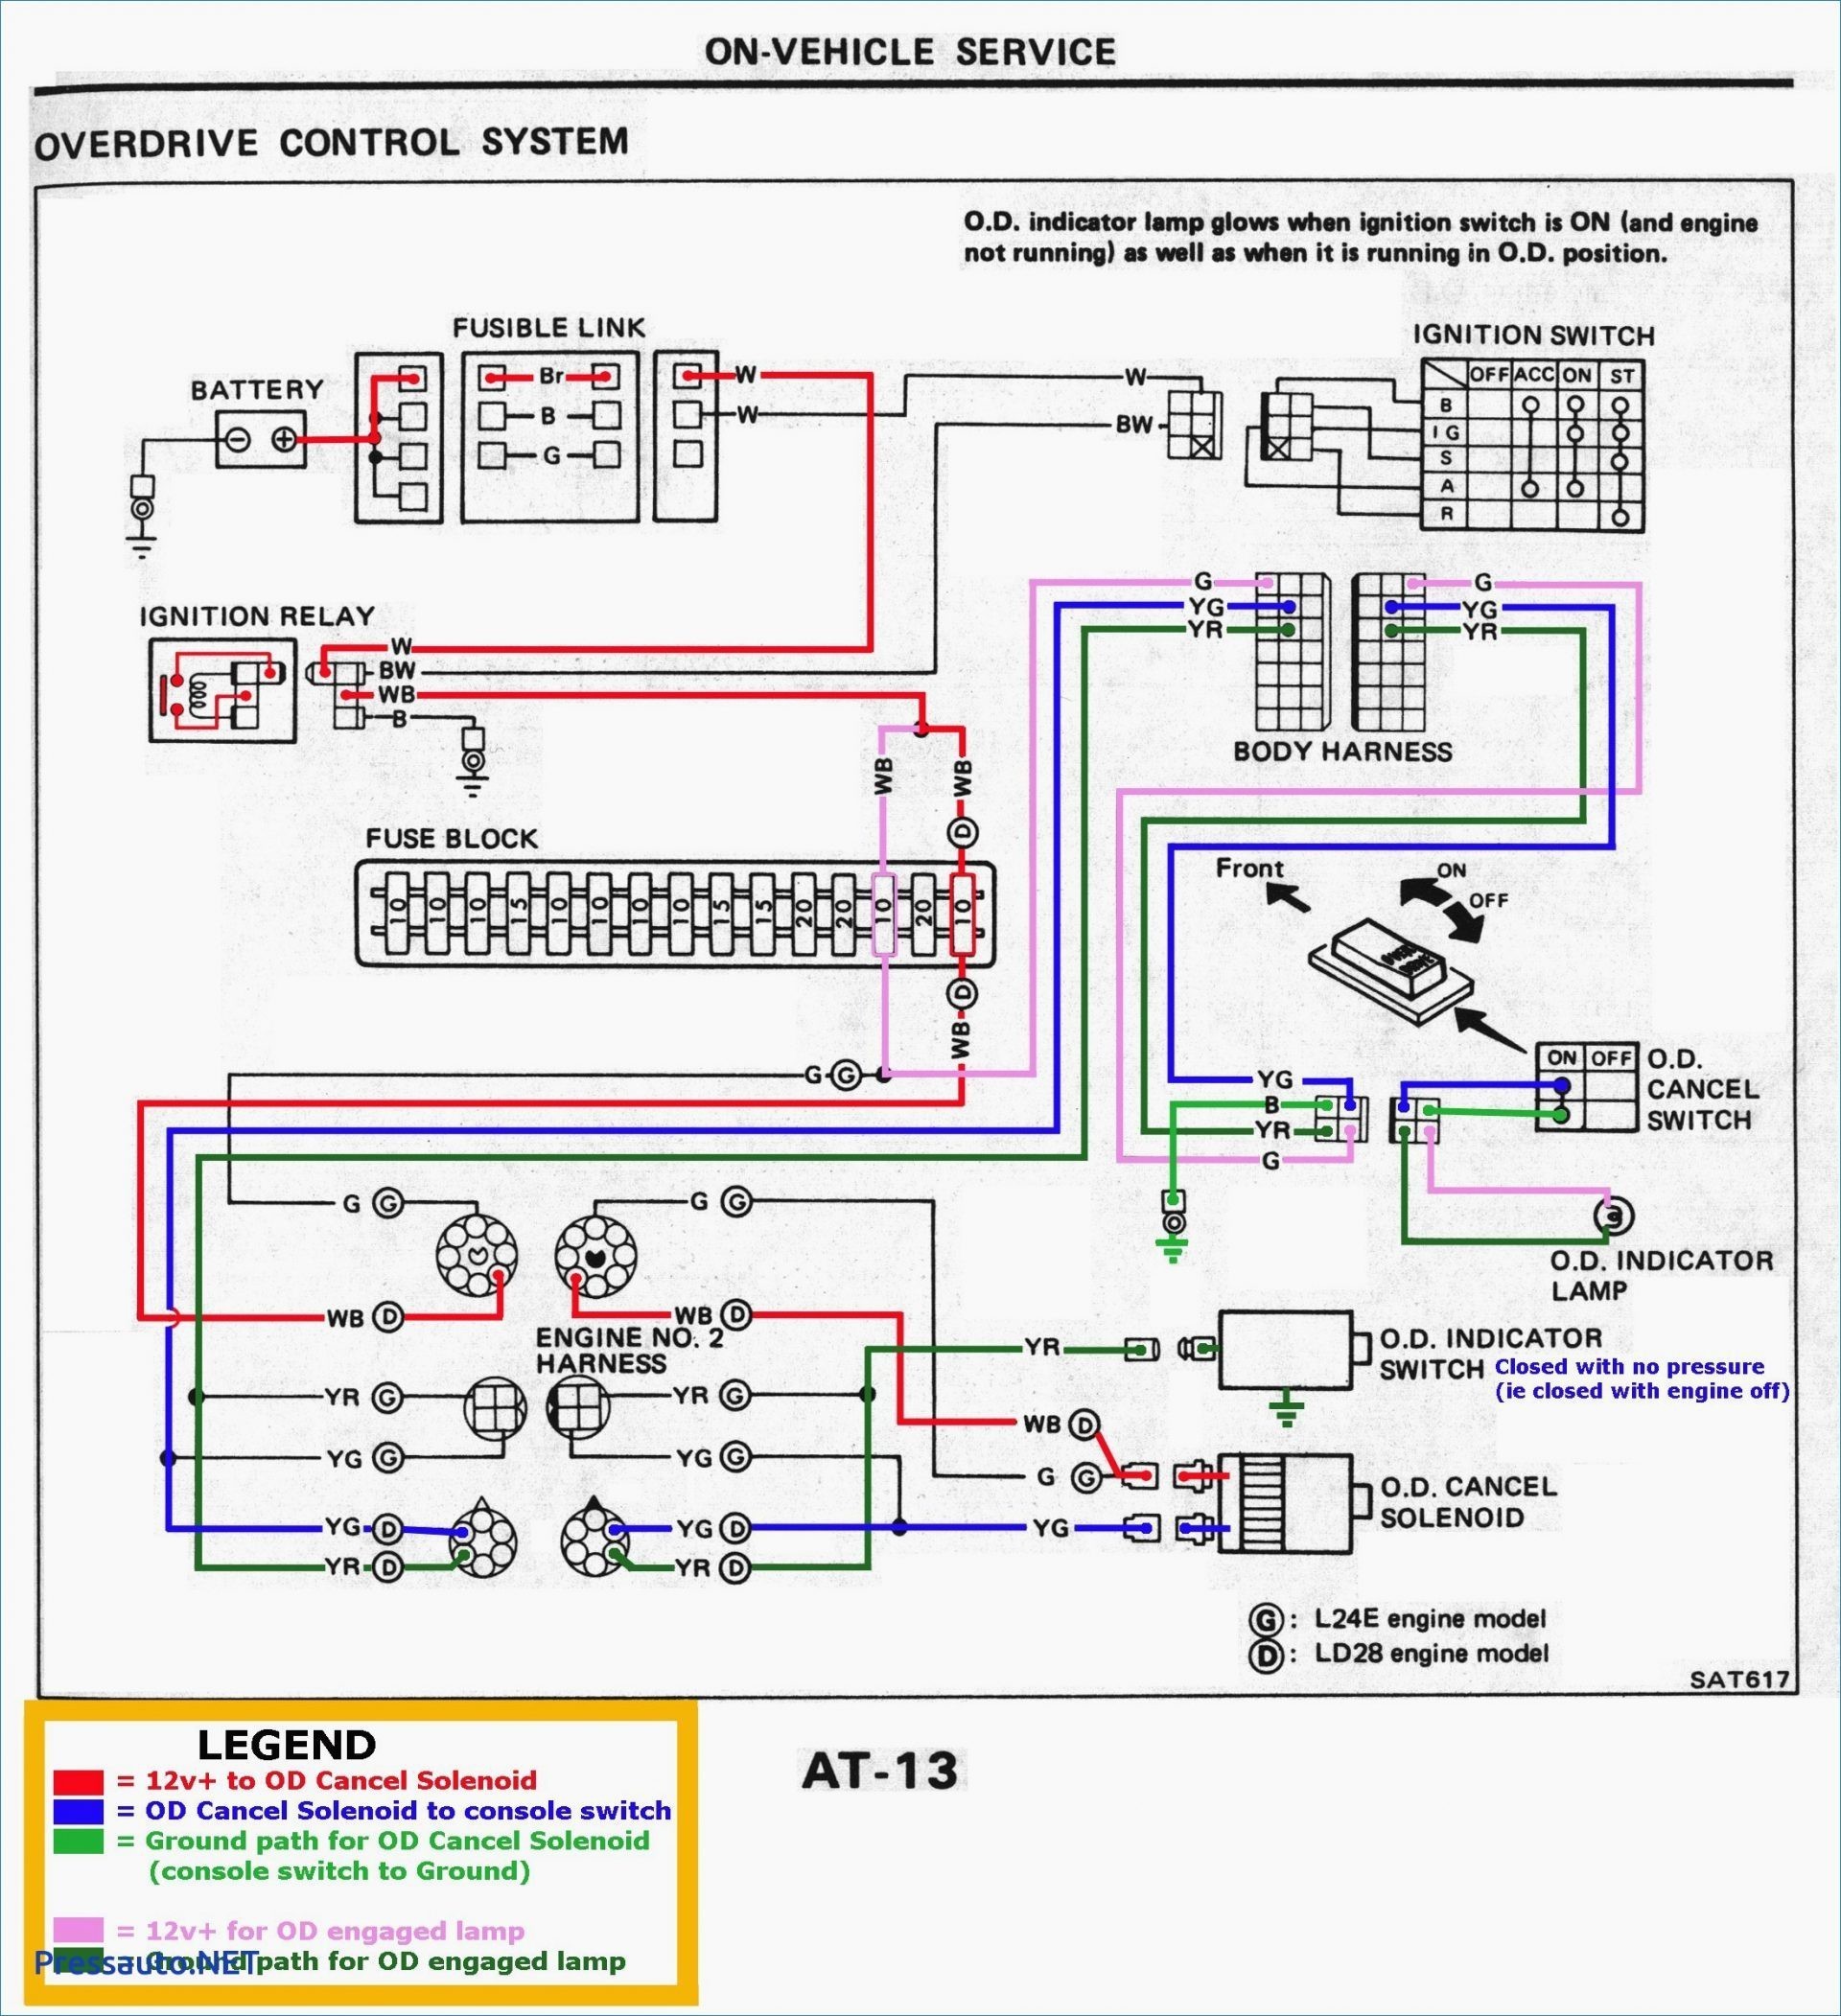 grote tail light wiring diagram unique 2003 s10 tail lights best of grote tail light wiring diagram